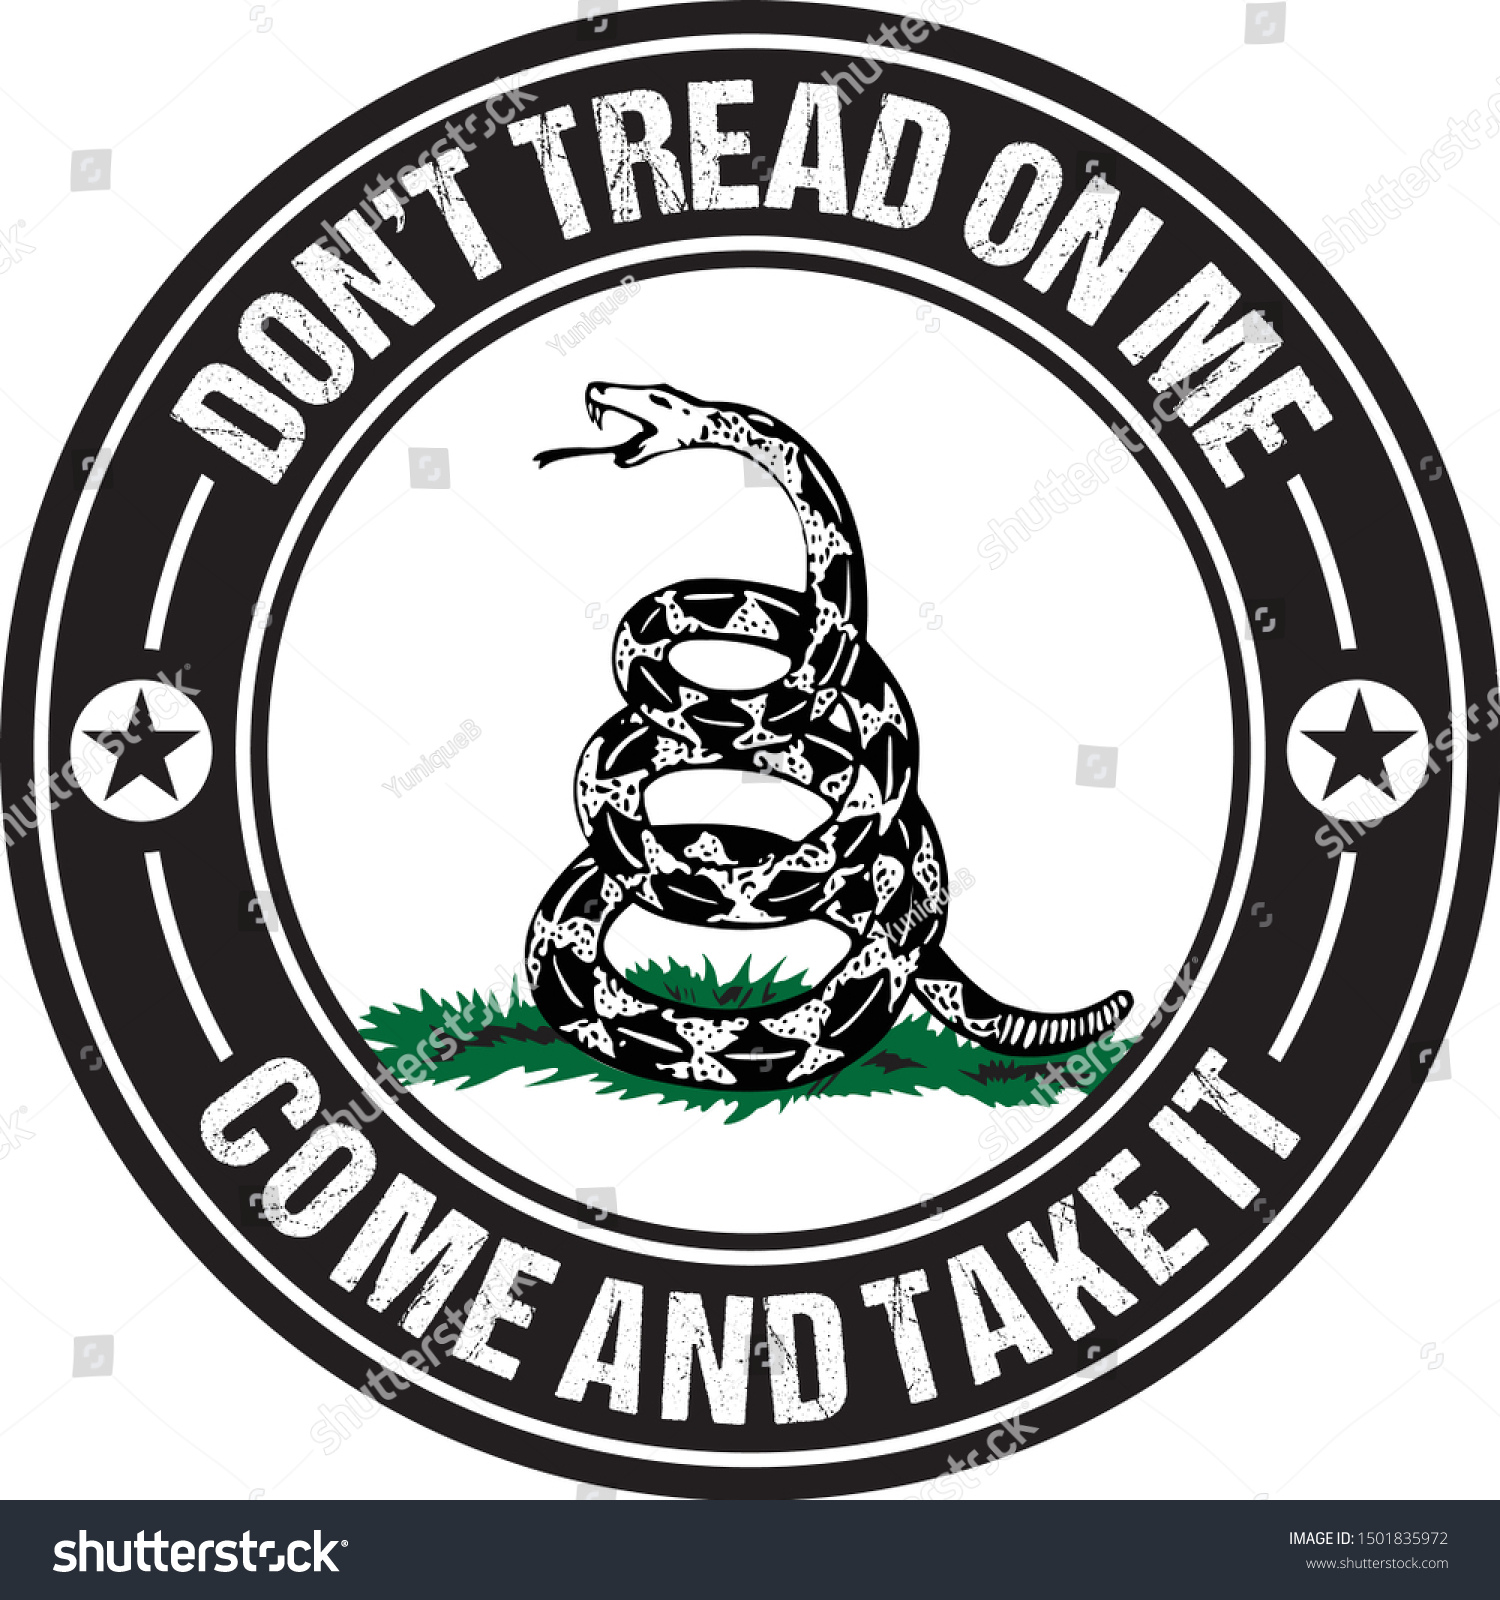 SVG of Don't Tread On Me, Come and Take It emblem for print, T-shirt or badge design. svg